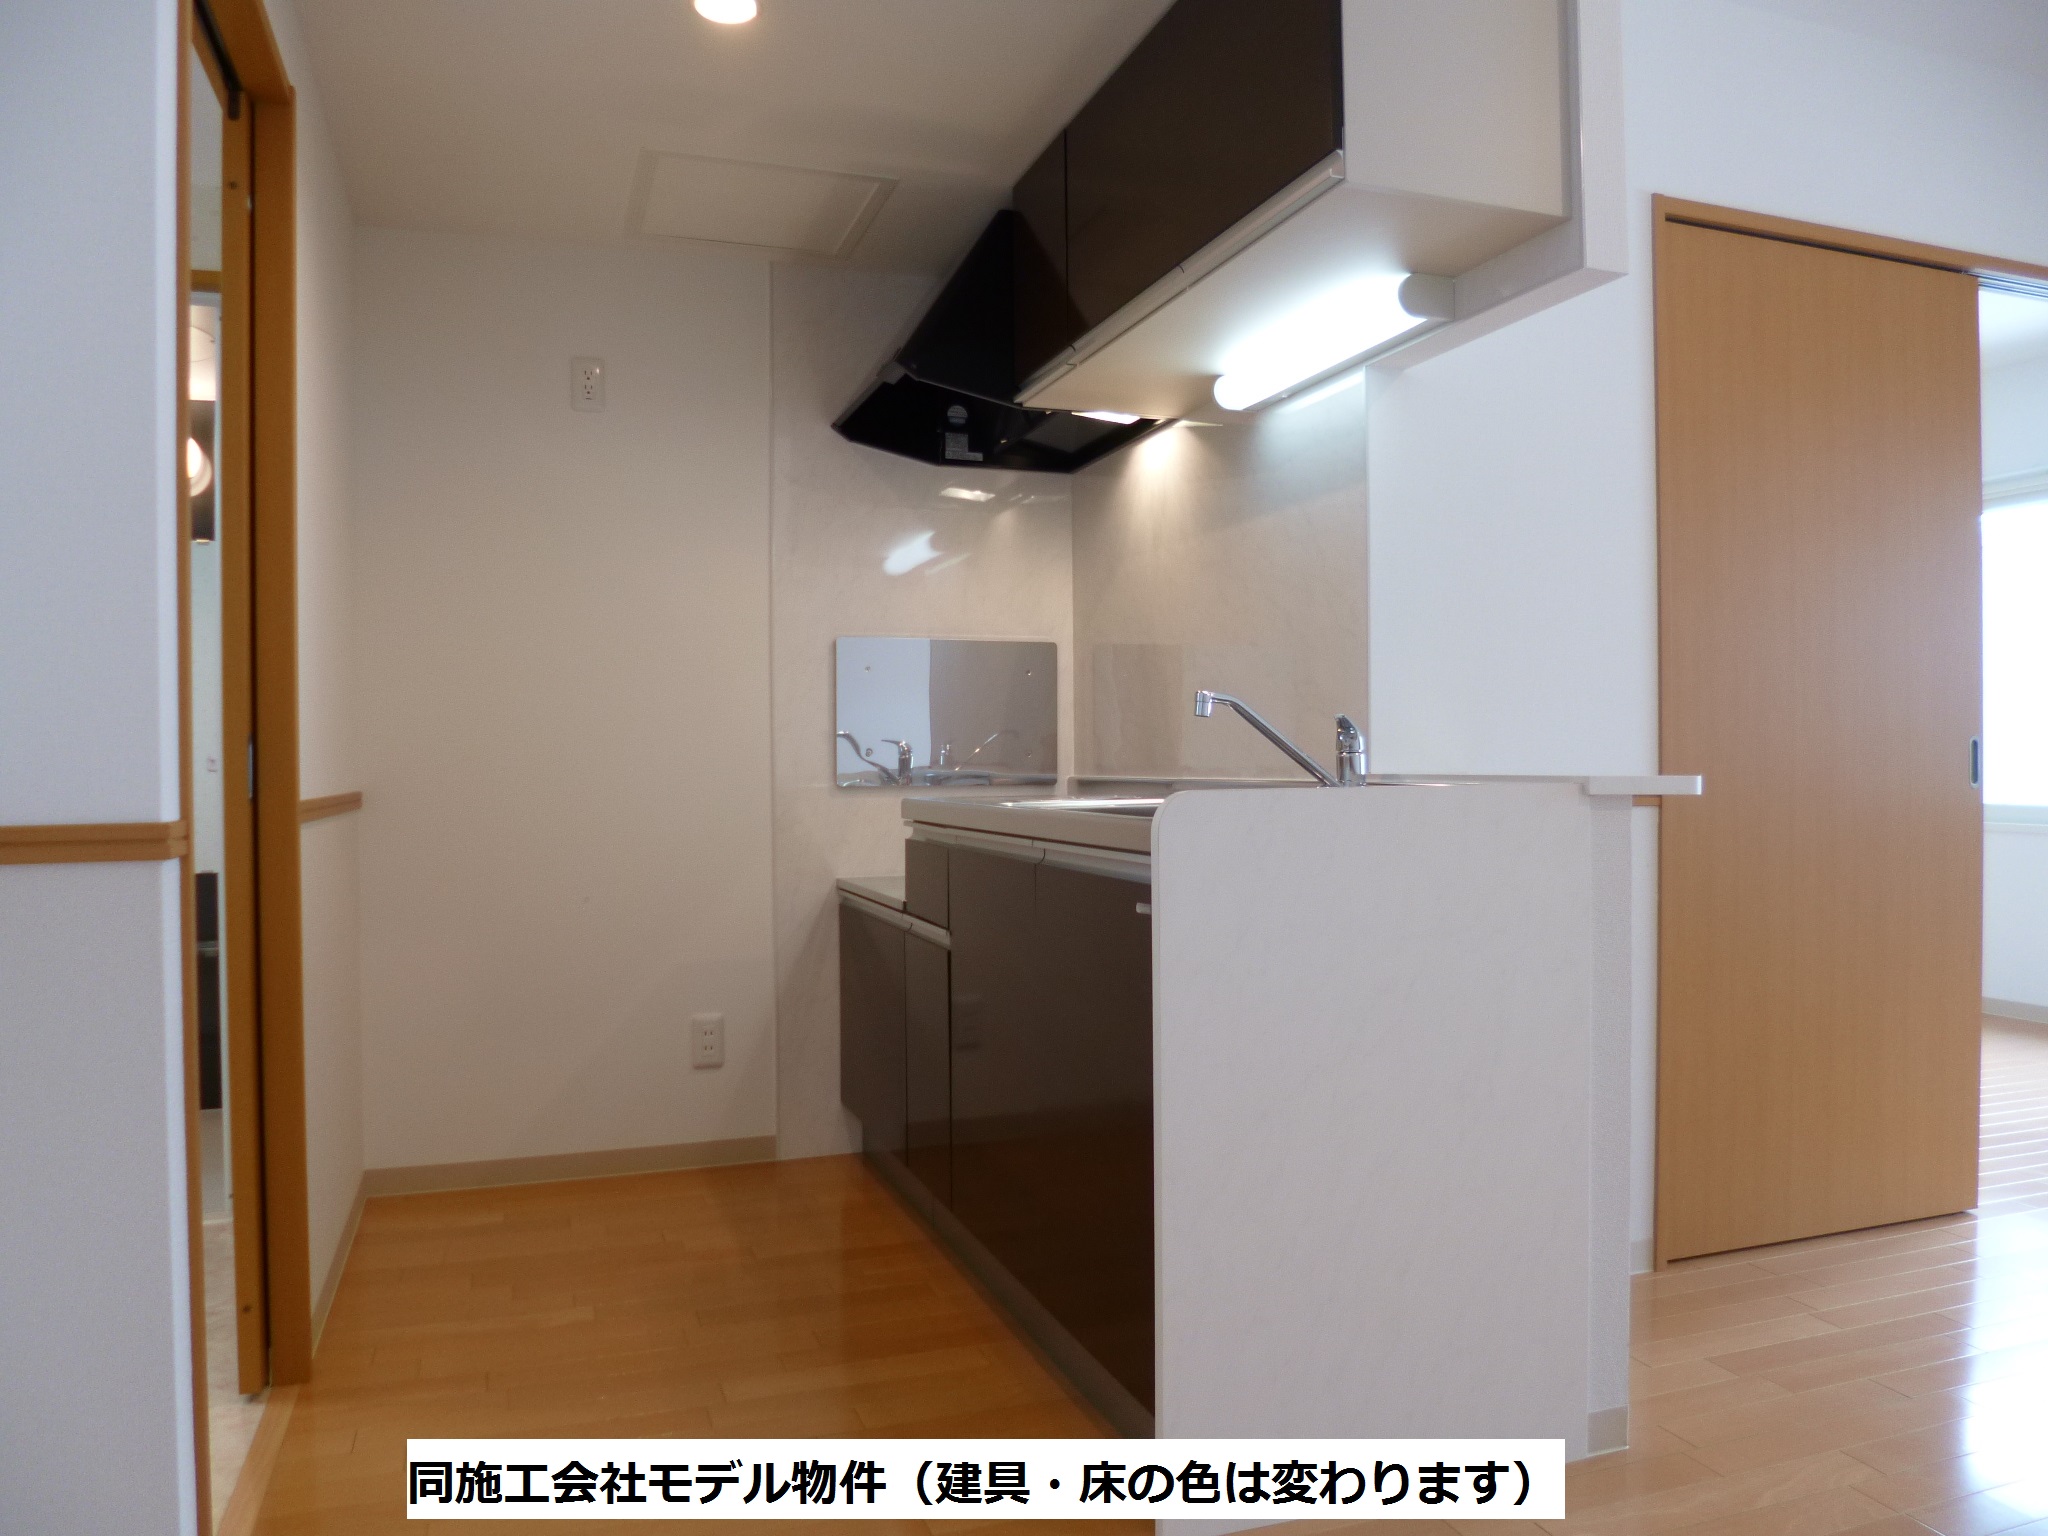 Kitchen. It is a photograph of the same construction company model properties